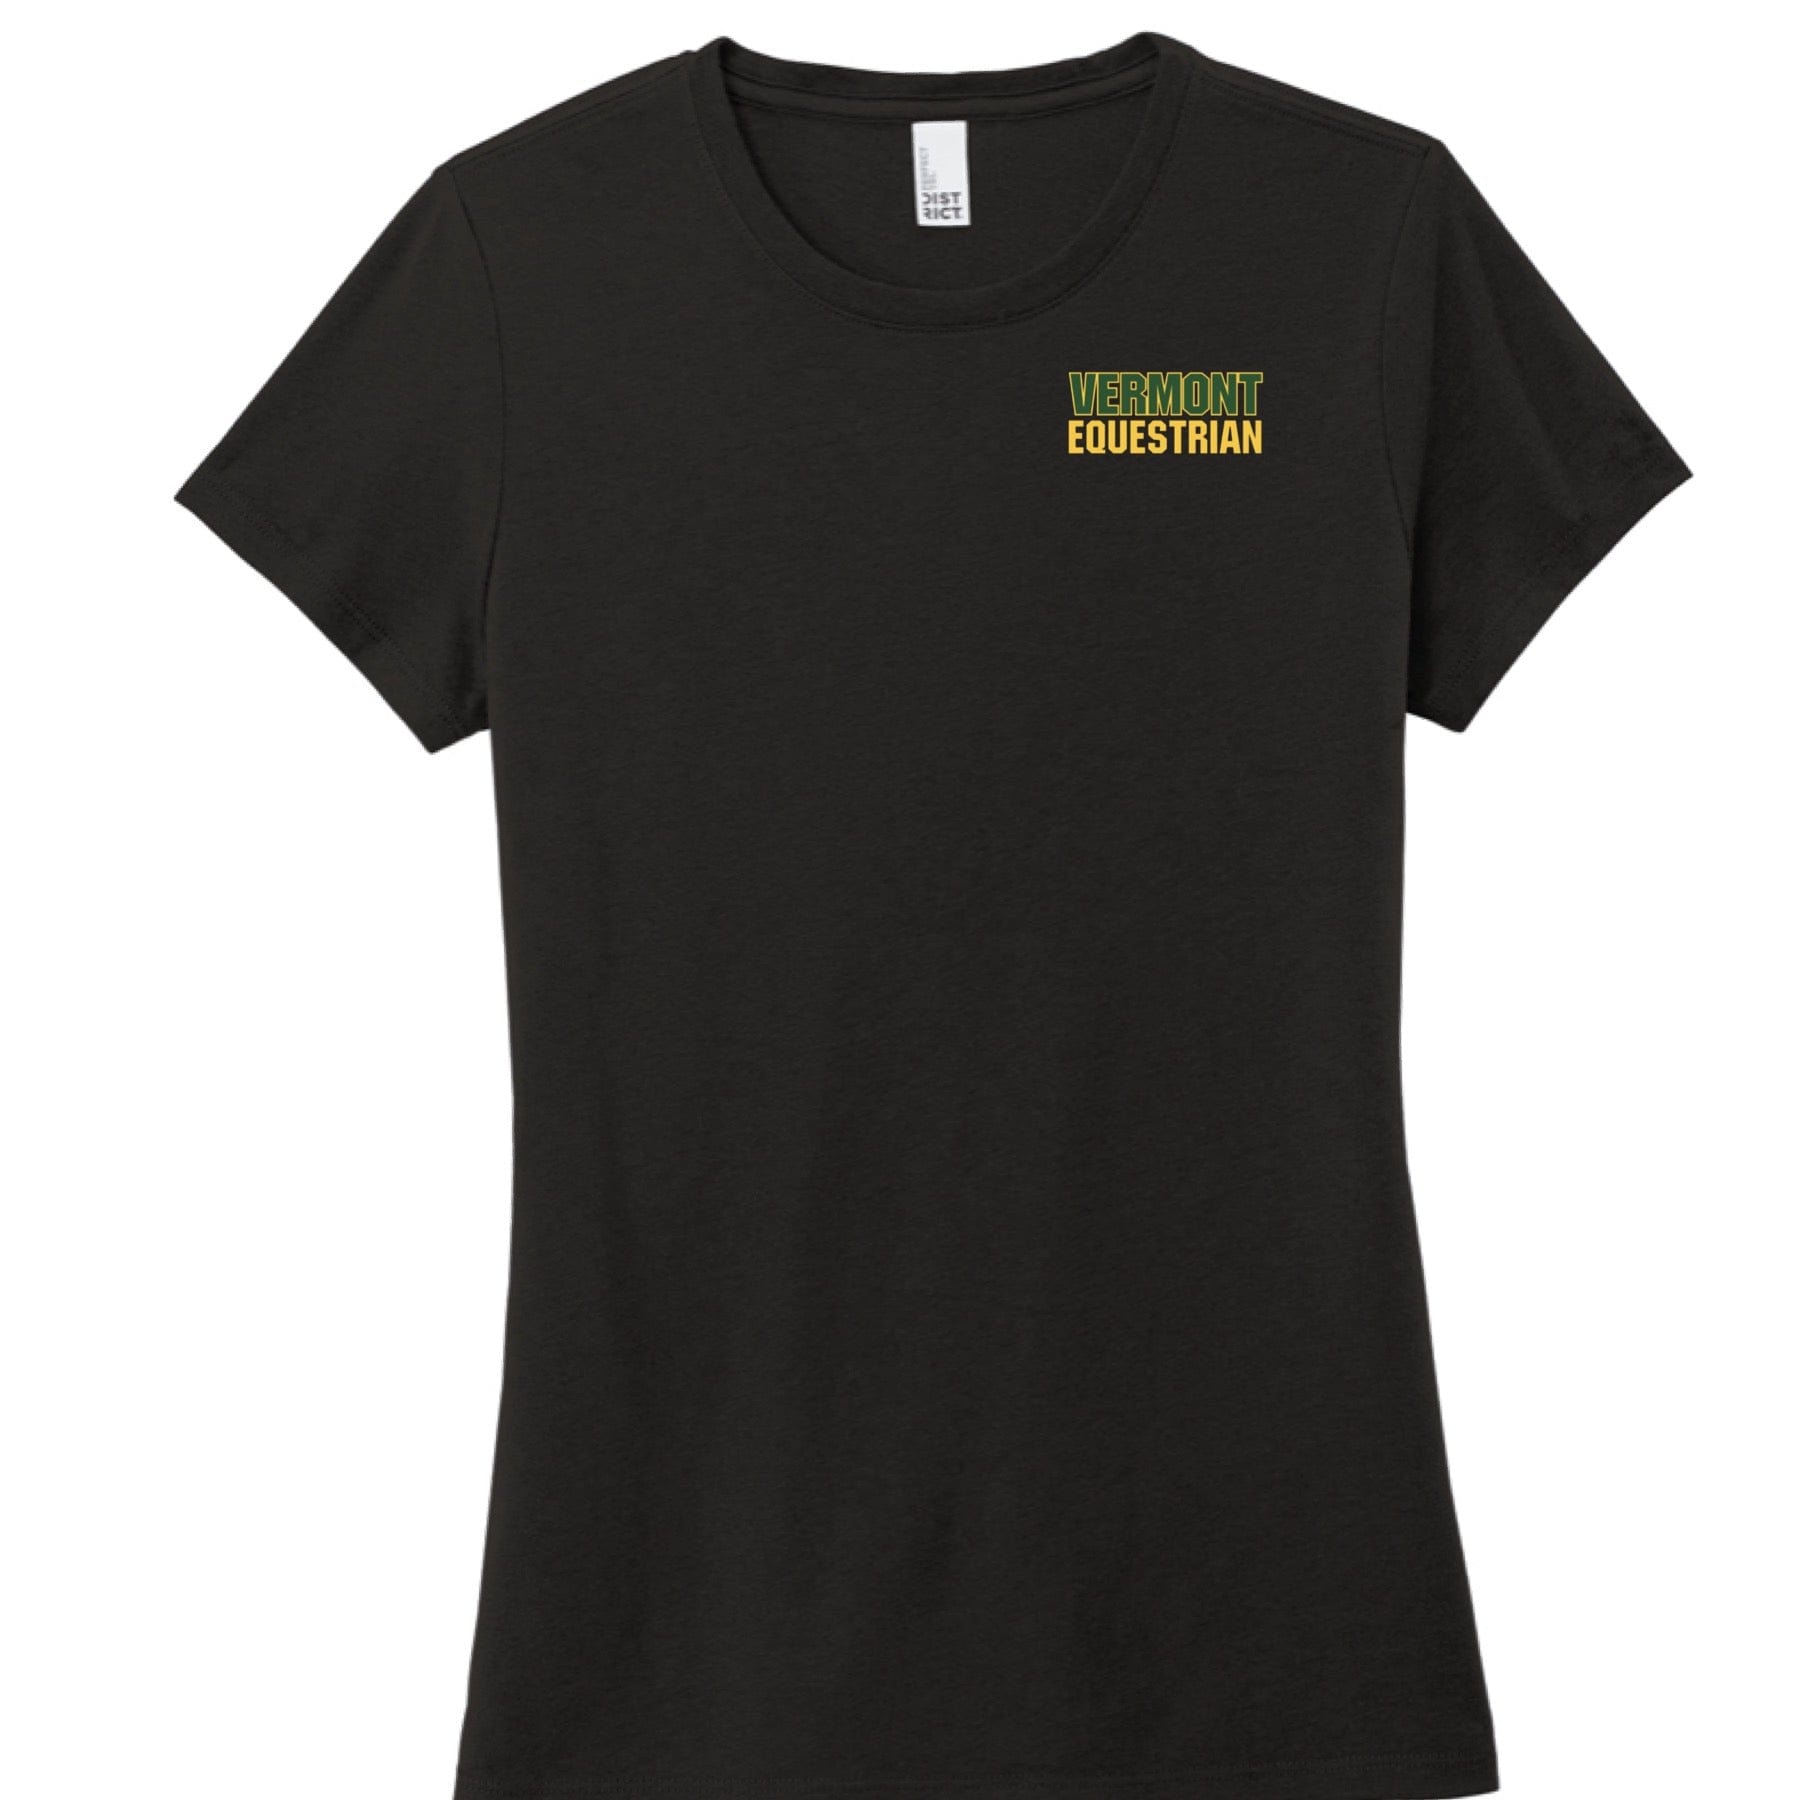 Equestrian Team Apparel Vermont Equestrian Tee Shirt equestrian team apparel online tack store mobile tack store custom farm apparel custom show stable clothing equestrian lifestyle horse show clothing riding clothes horses equestrian tack store